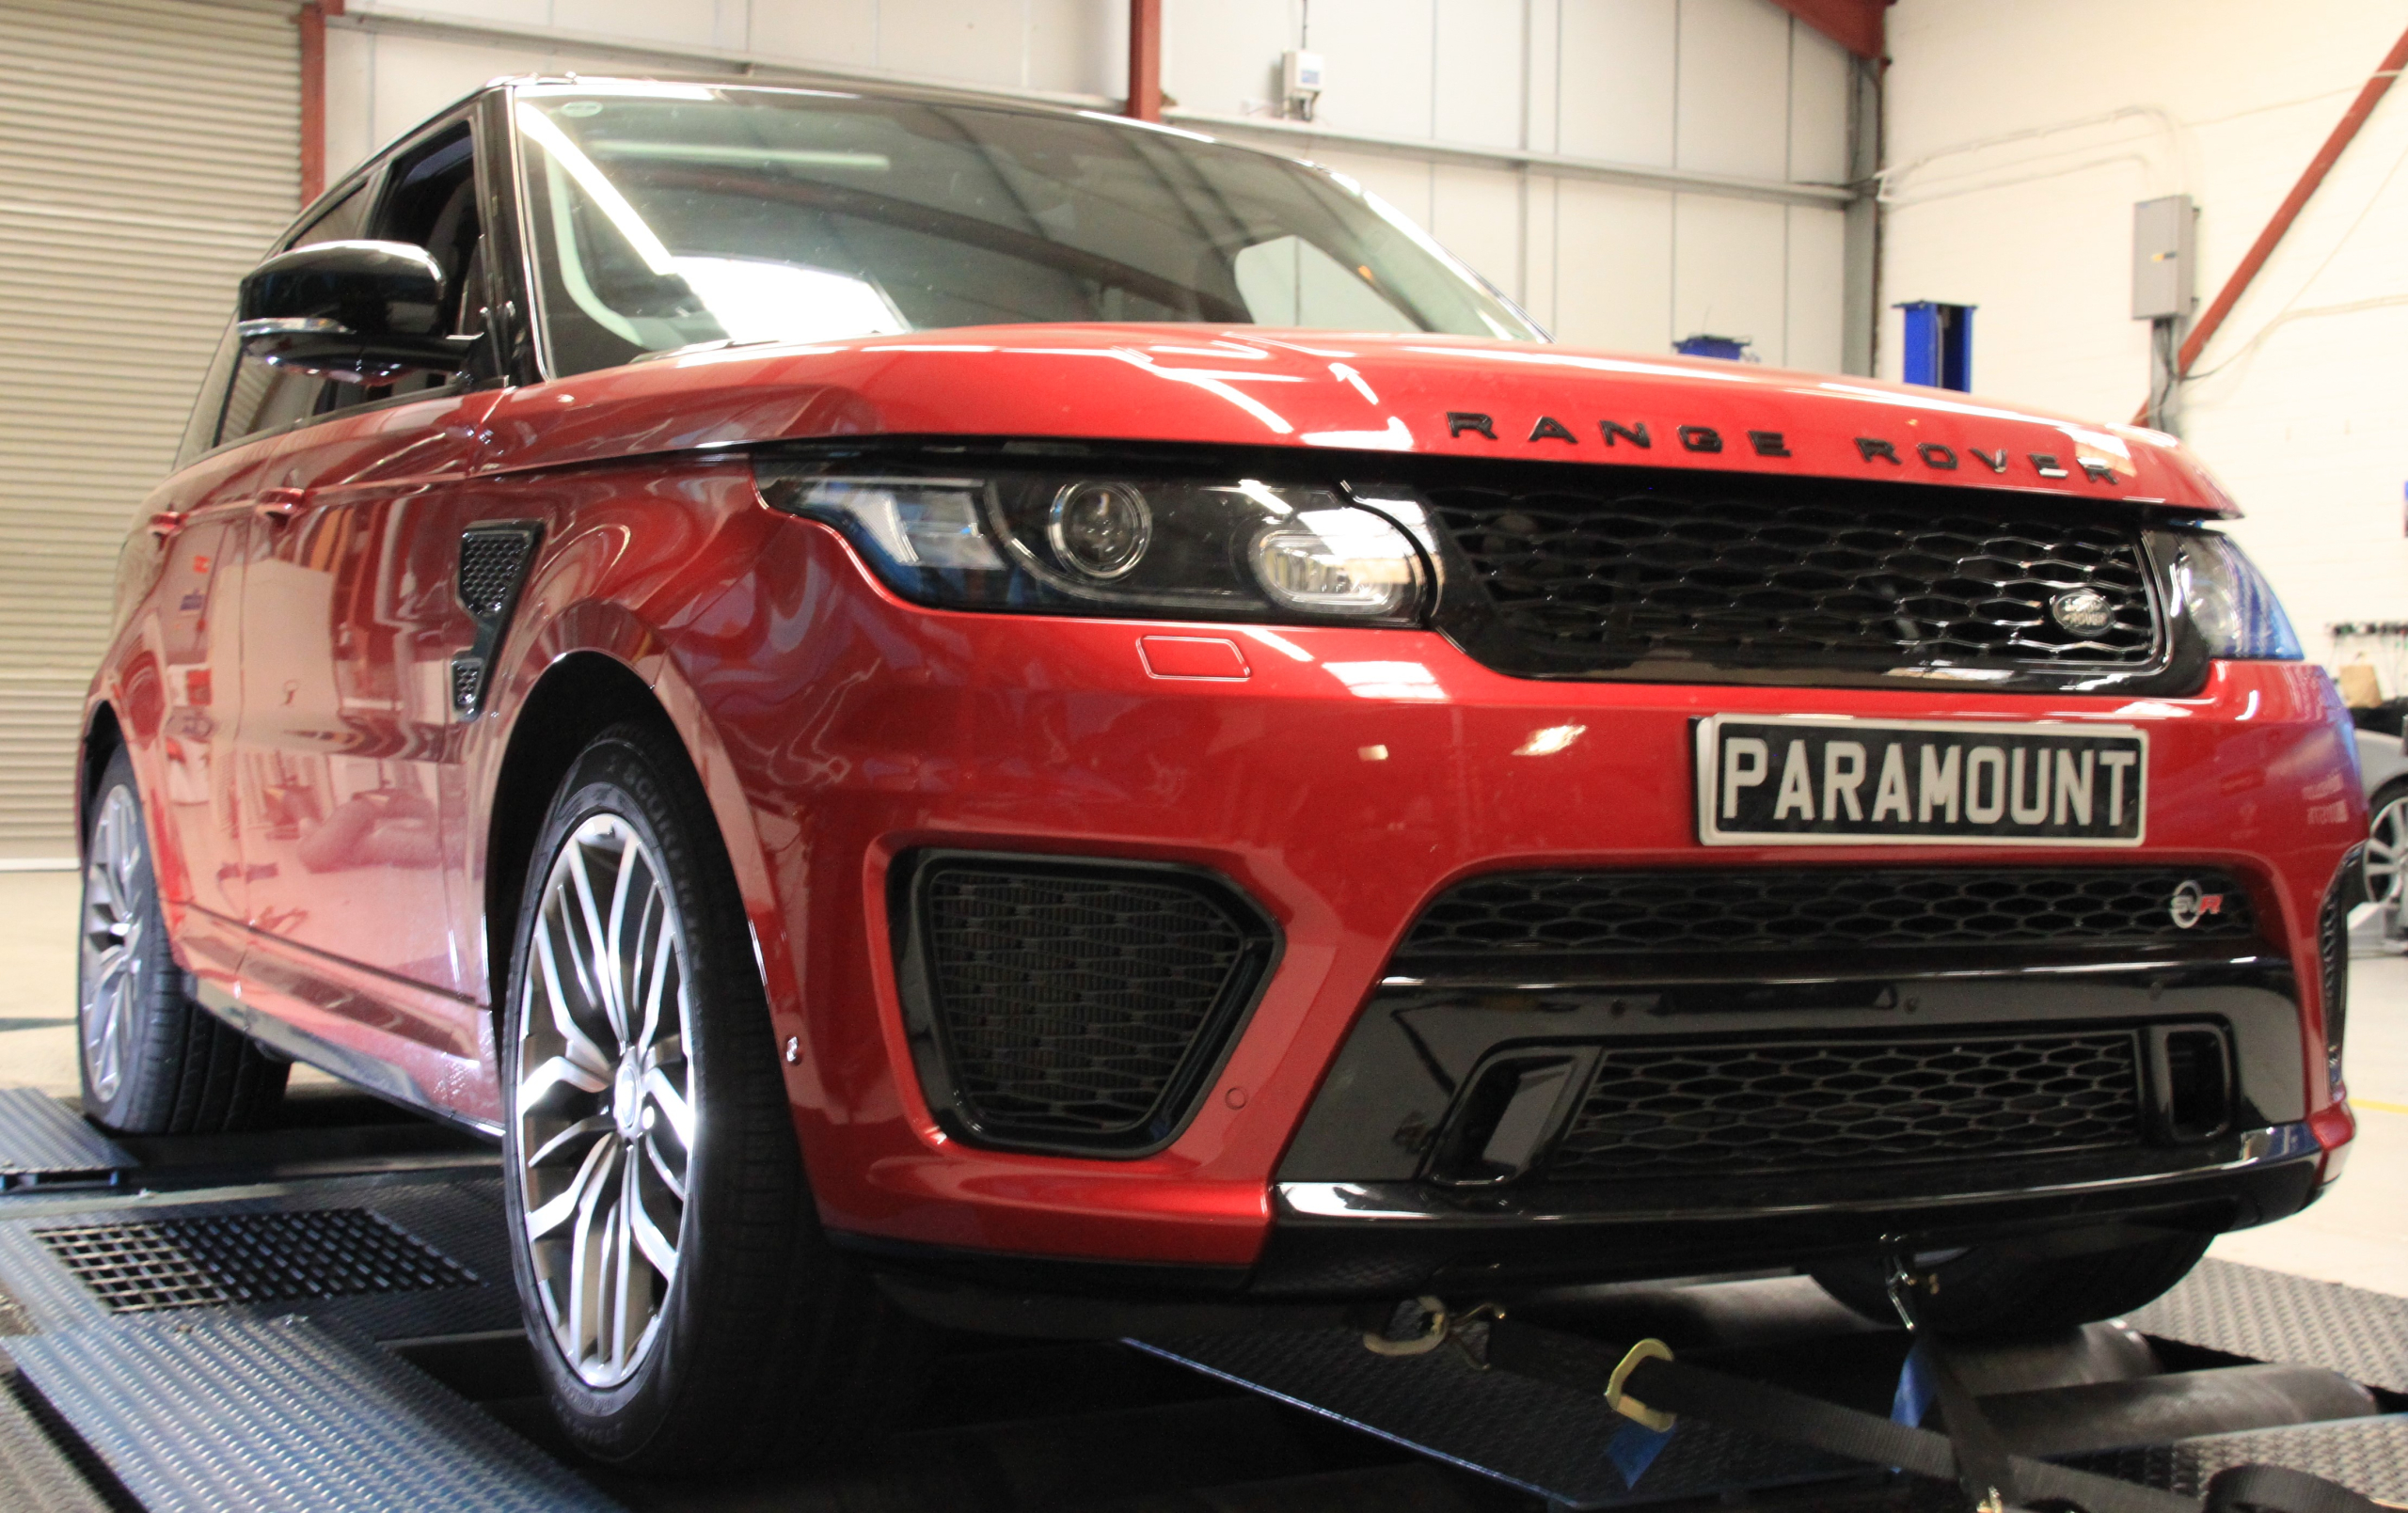 Range Rover Tuning and ECU Remapping, Range Rover Tuning and ECU Remapping